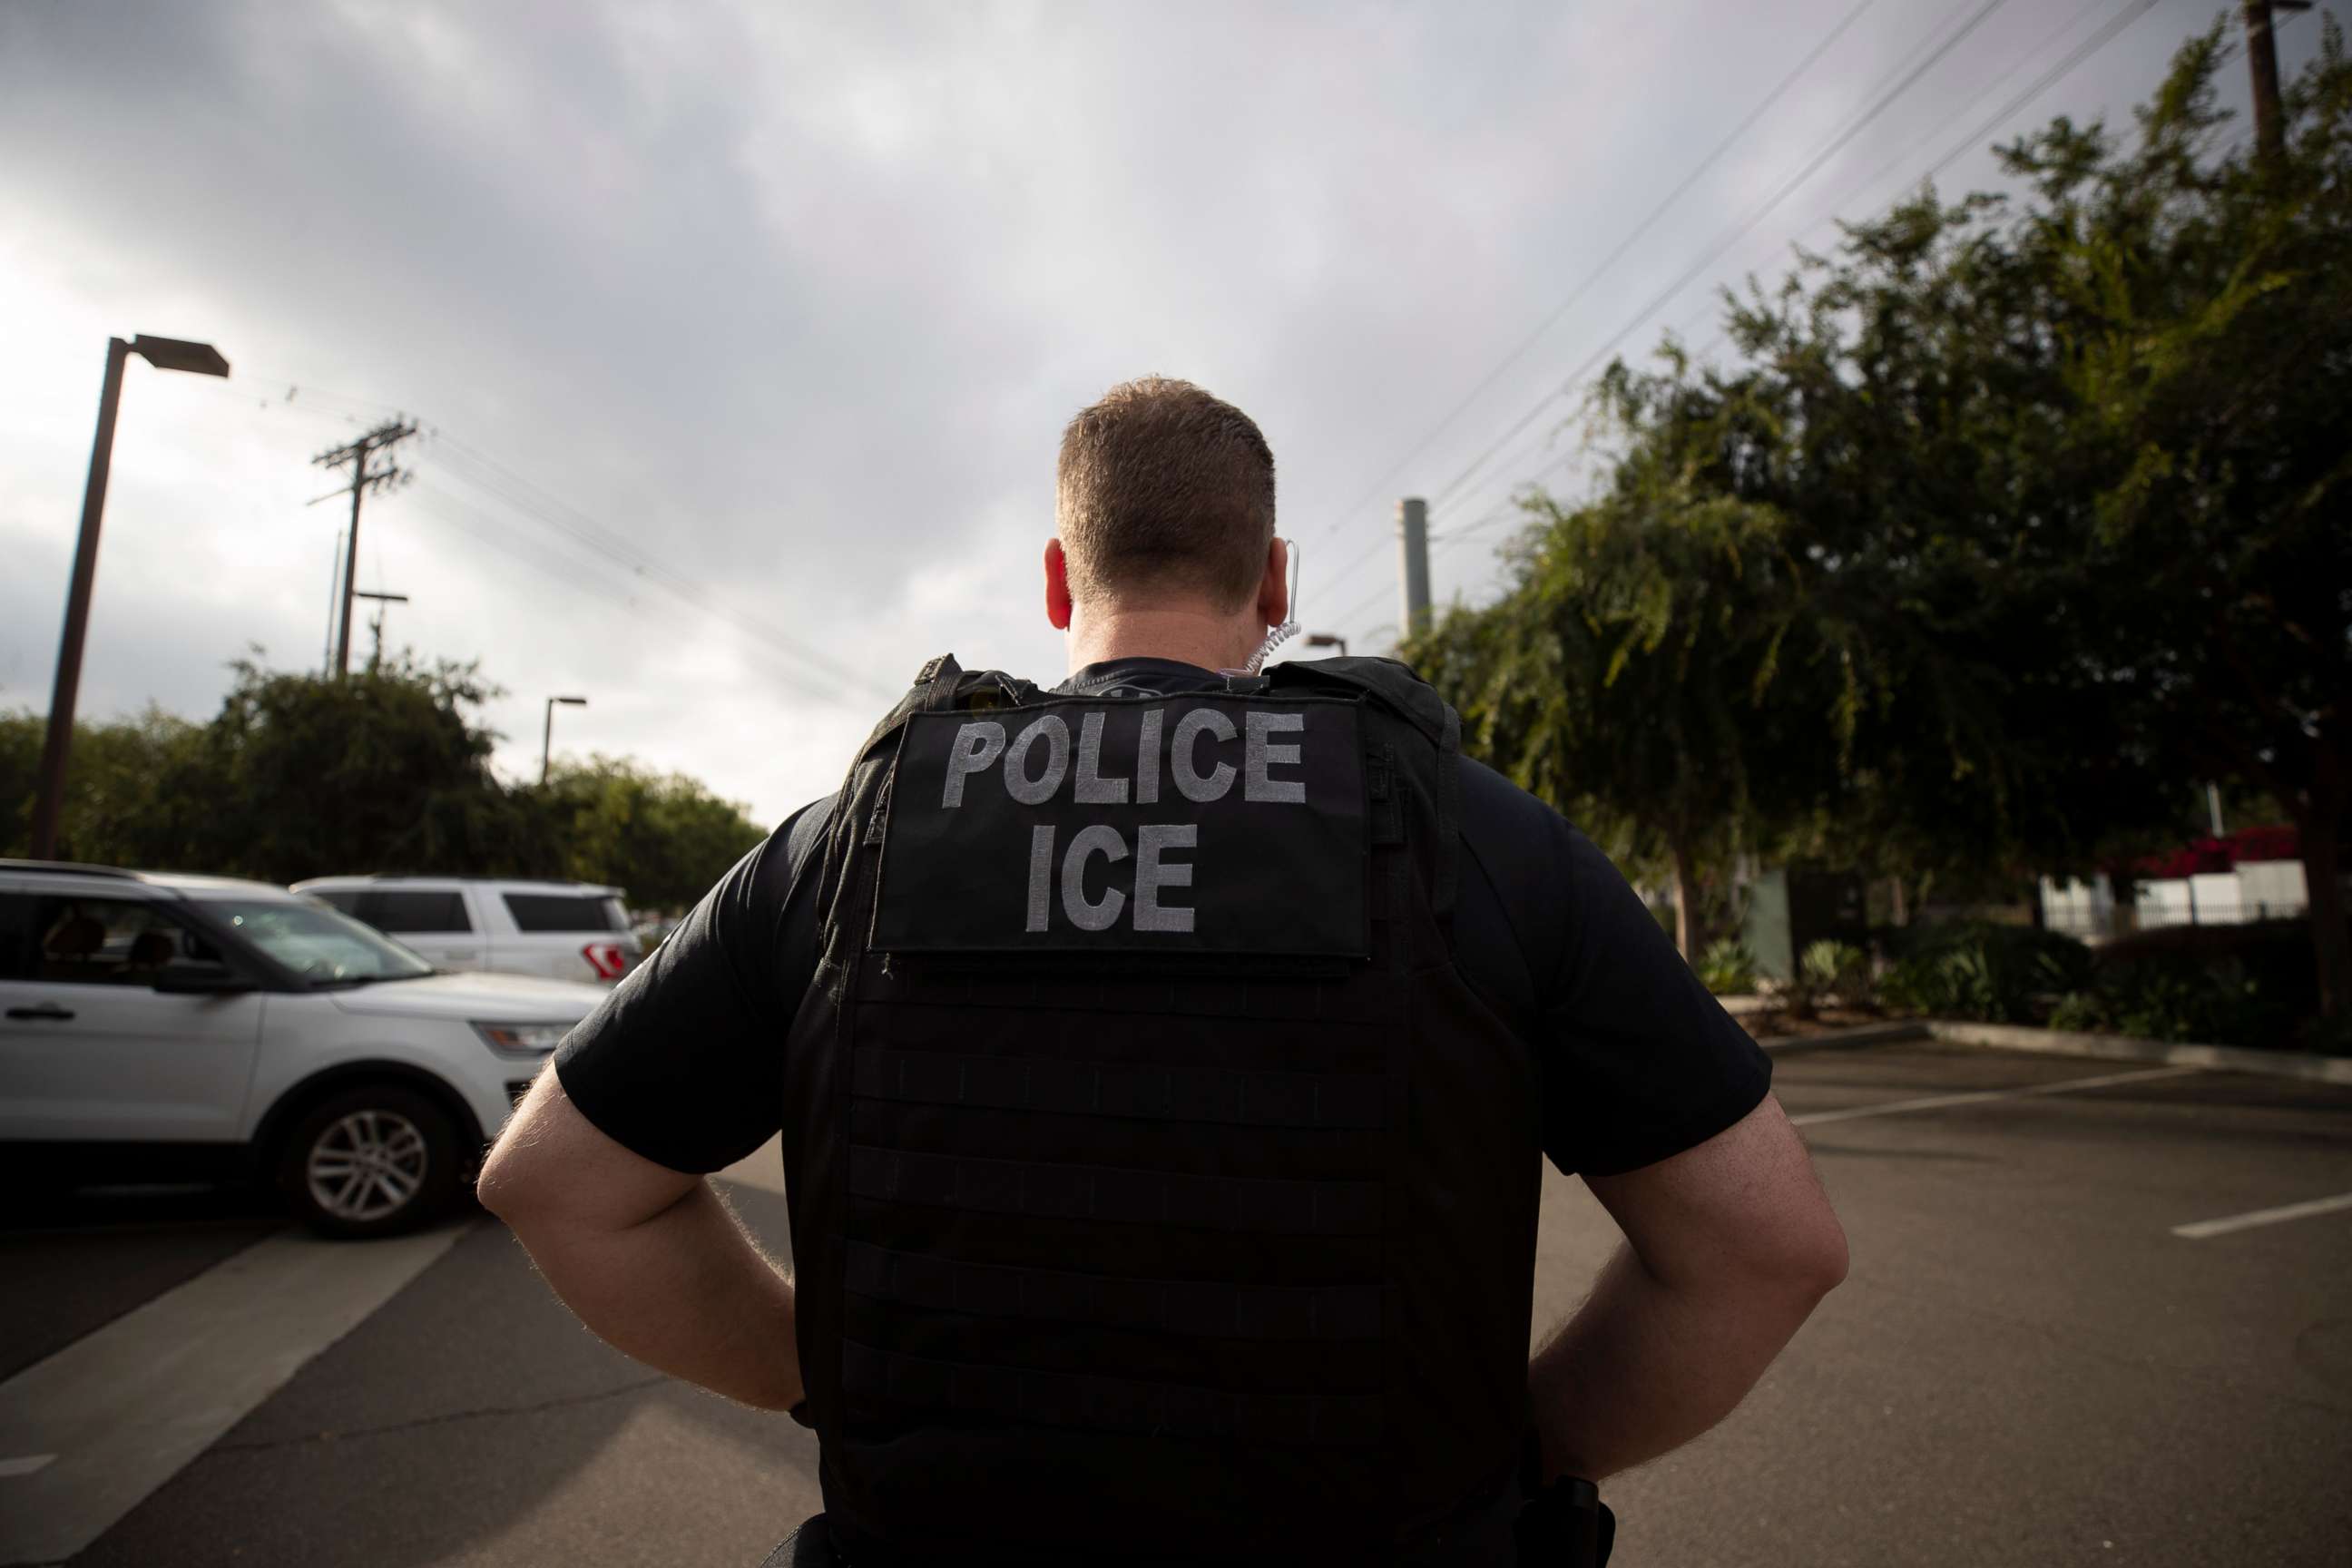 PHOTO: In this July 8, 2019, file photo, a U.S. Immigration and Customs Enforcement (ICE) officer looks on during an operation in Escondido, Calif.